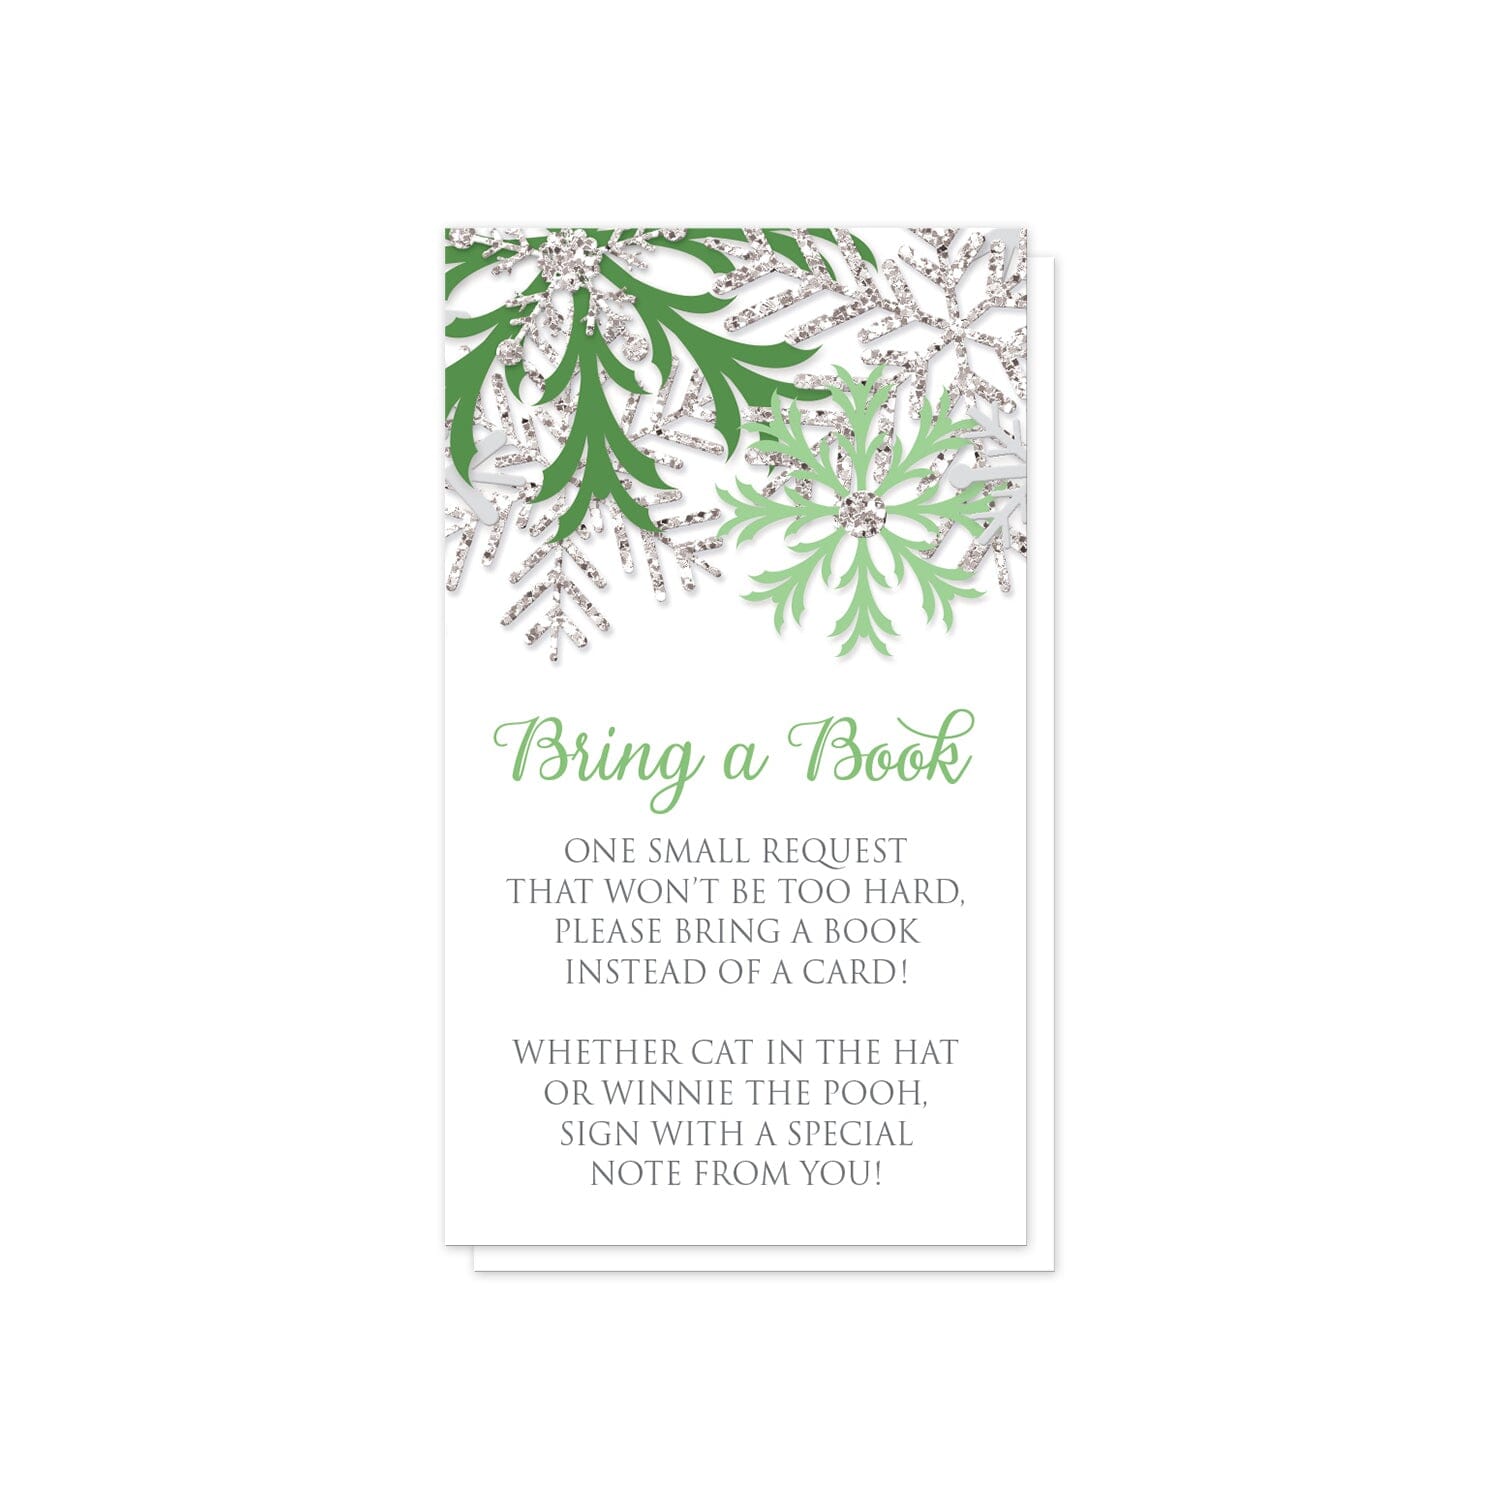 Winter Green Silver Snowflake Bring a Book Cards at Artistically Invited. Pretty winter green silver snowflake bring a book cards designed with green, light green, and silver-colored glitter-illustrated snowflakes along the top. Your book request details are printed in green and gray over white below the snowflakes.